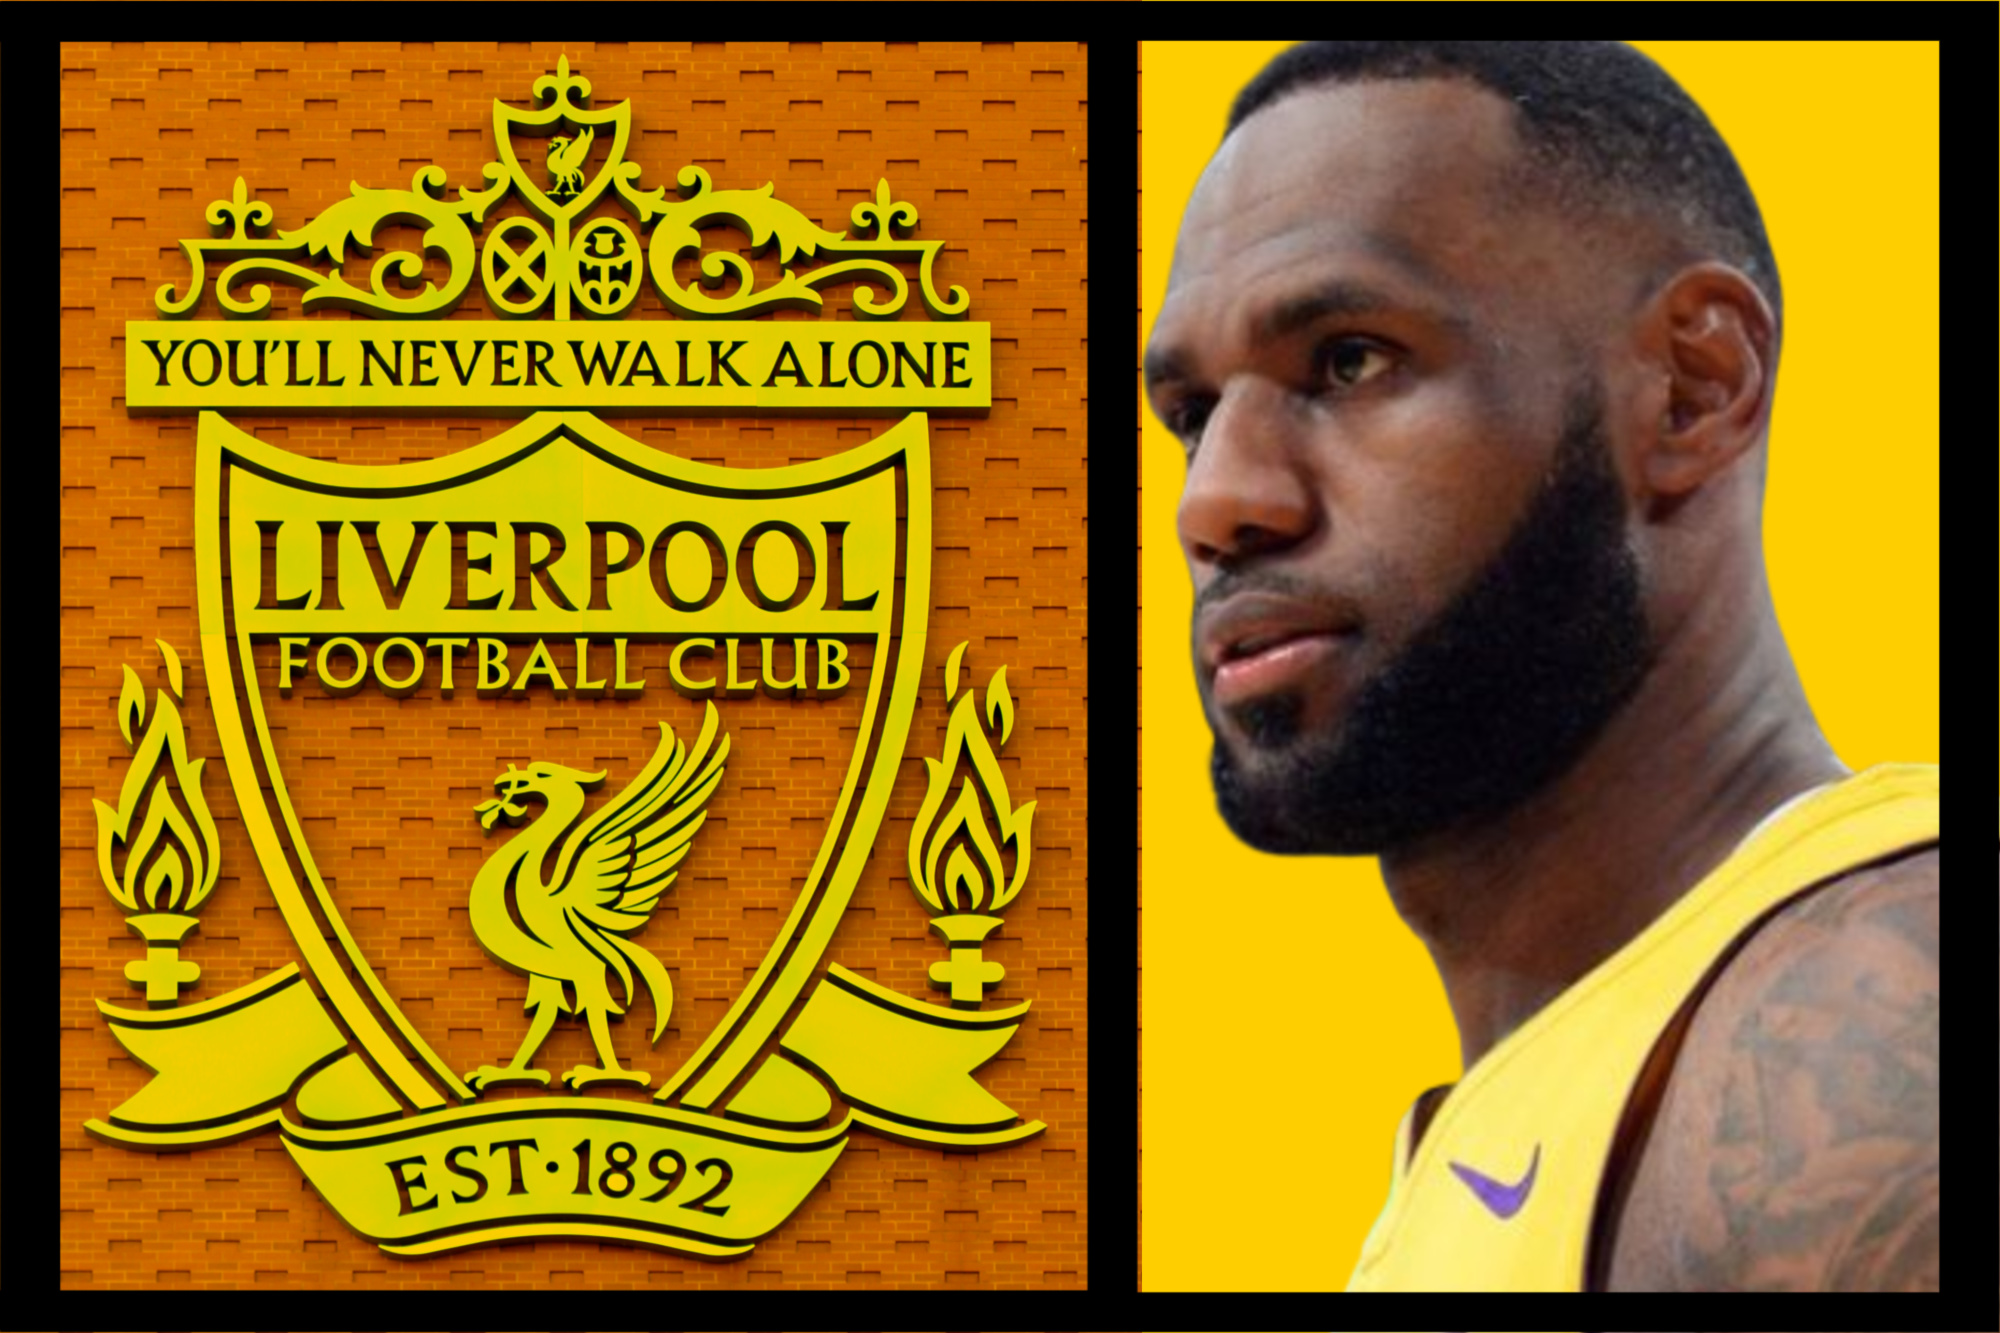 “Every Liverpool player” – LeBron James’ reply when asked about his favorite soccer player during a Q&A on Instagram